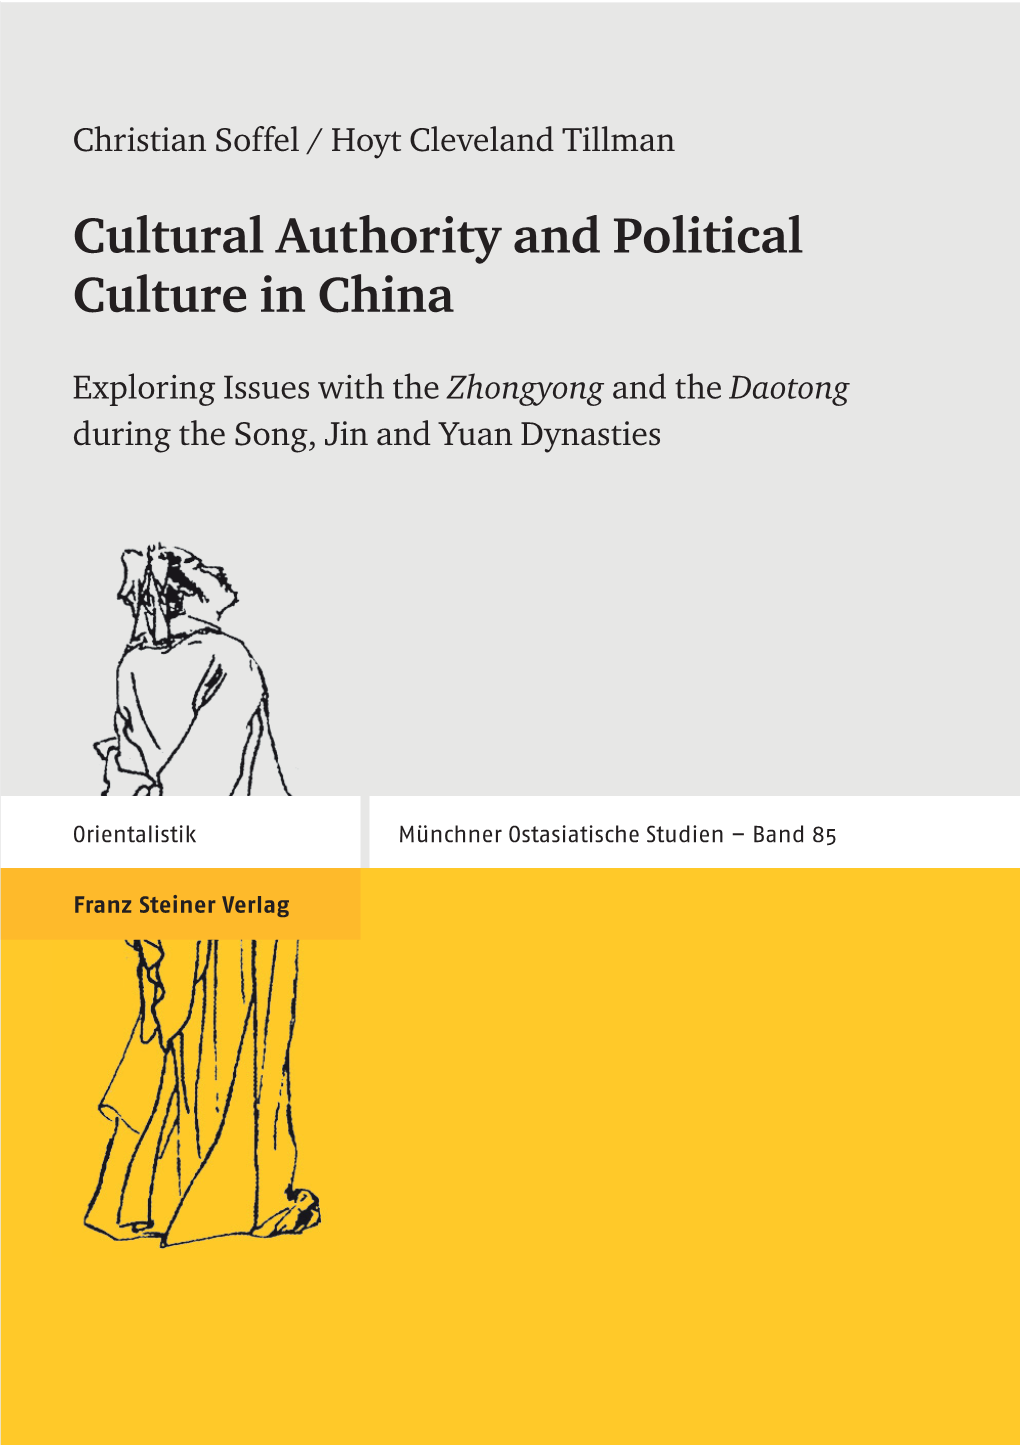 Cultural Authority and Political Culture in China